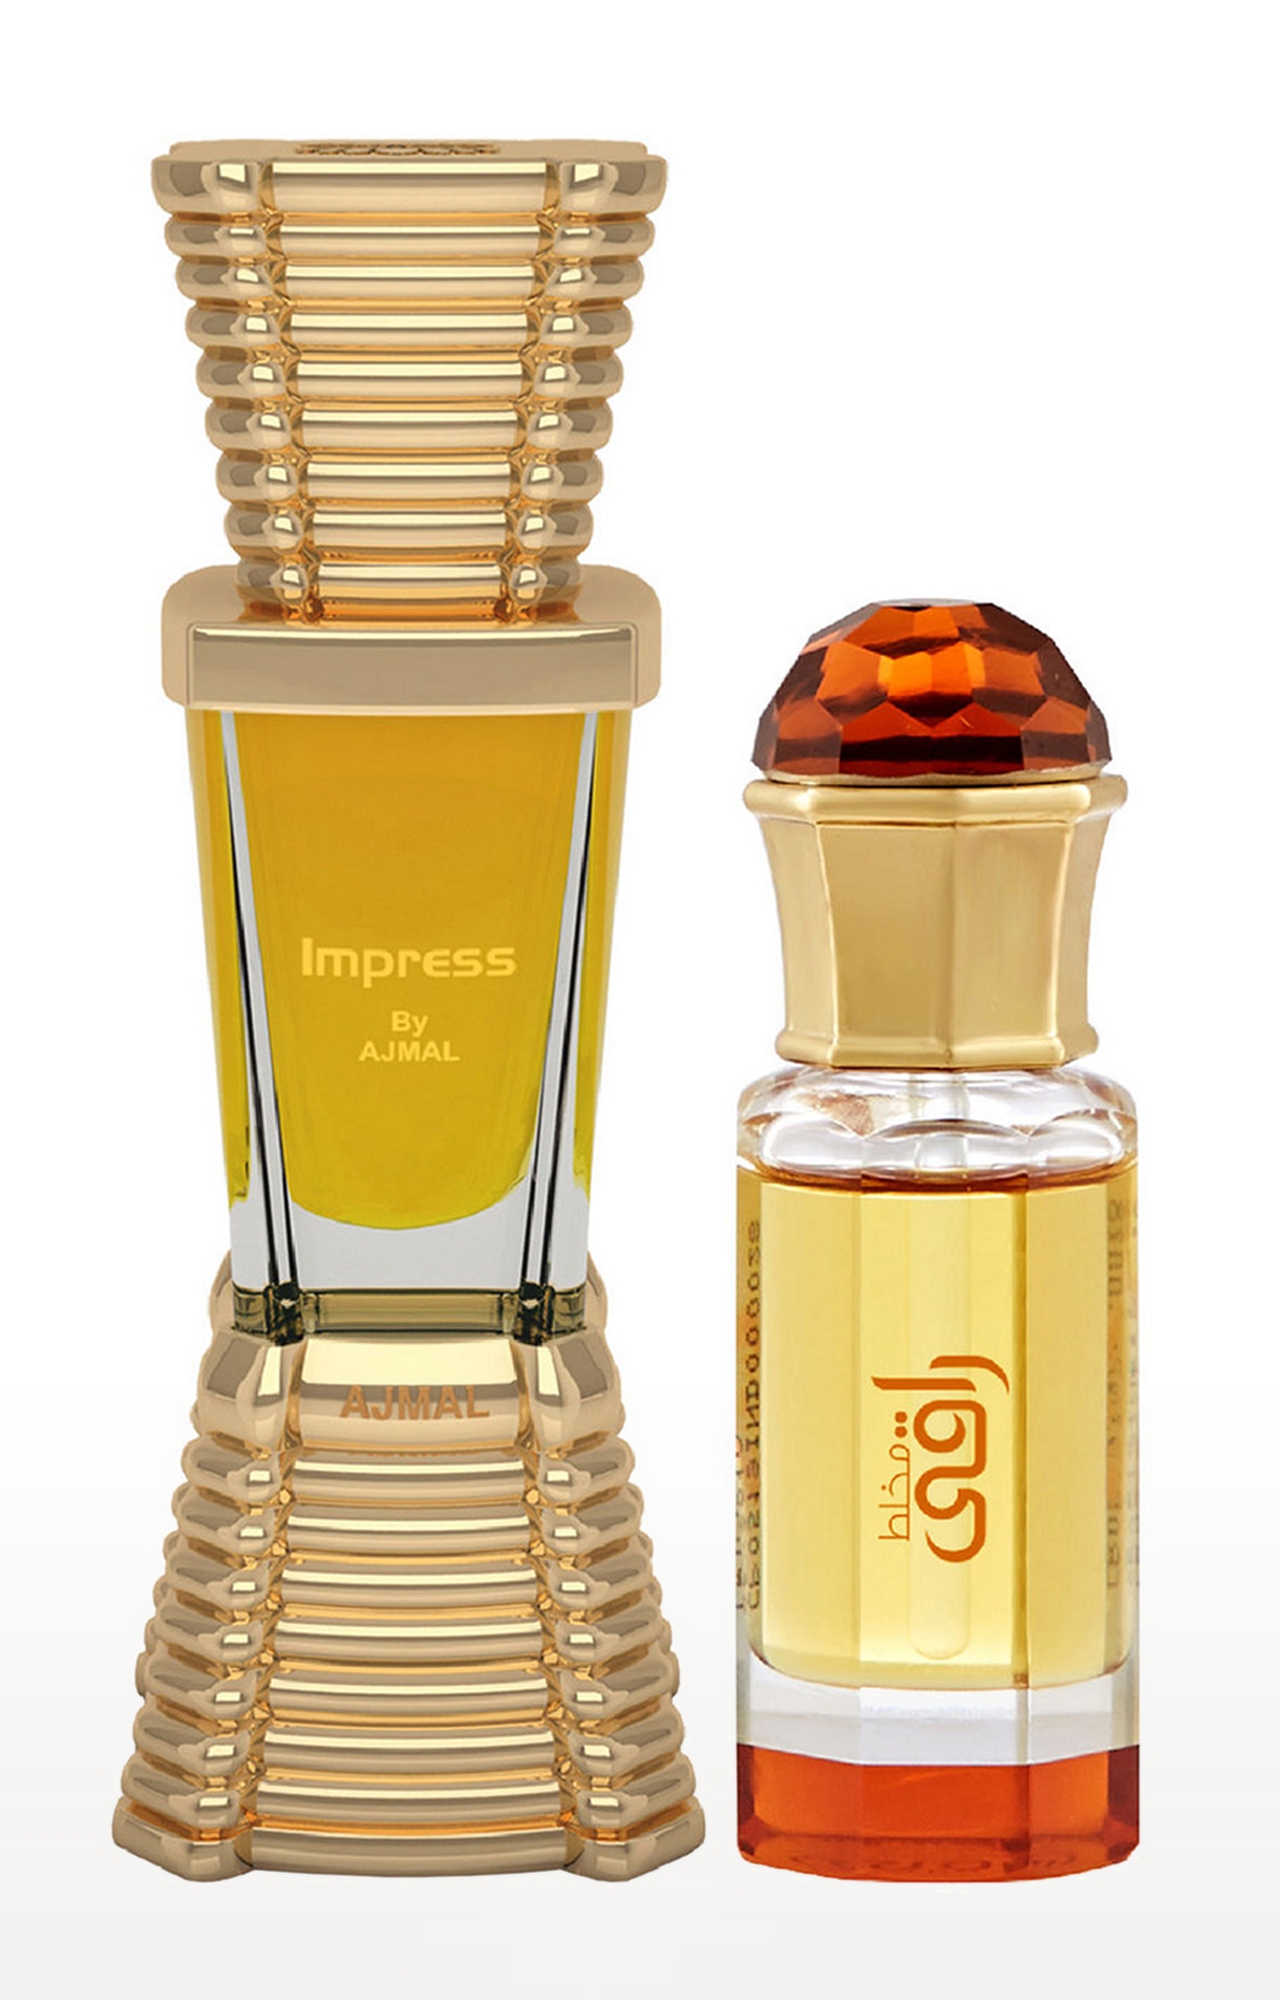 Ajmal Impress Concentrated Perfume Oil Alcohol-free Attar 10ml for Men and Mukhallat Raaqi Concentrated Perfume Oil Alcohol-free Attar 10ml for Unisex